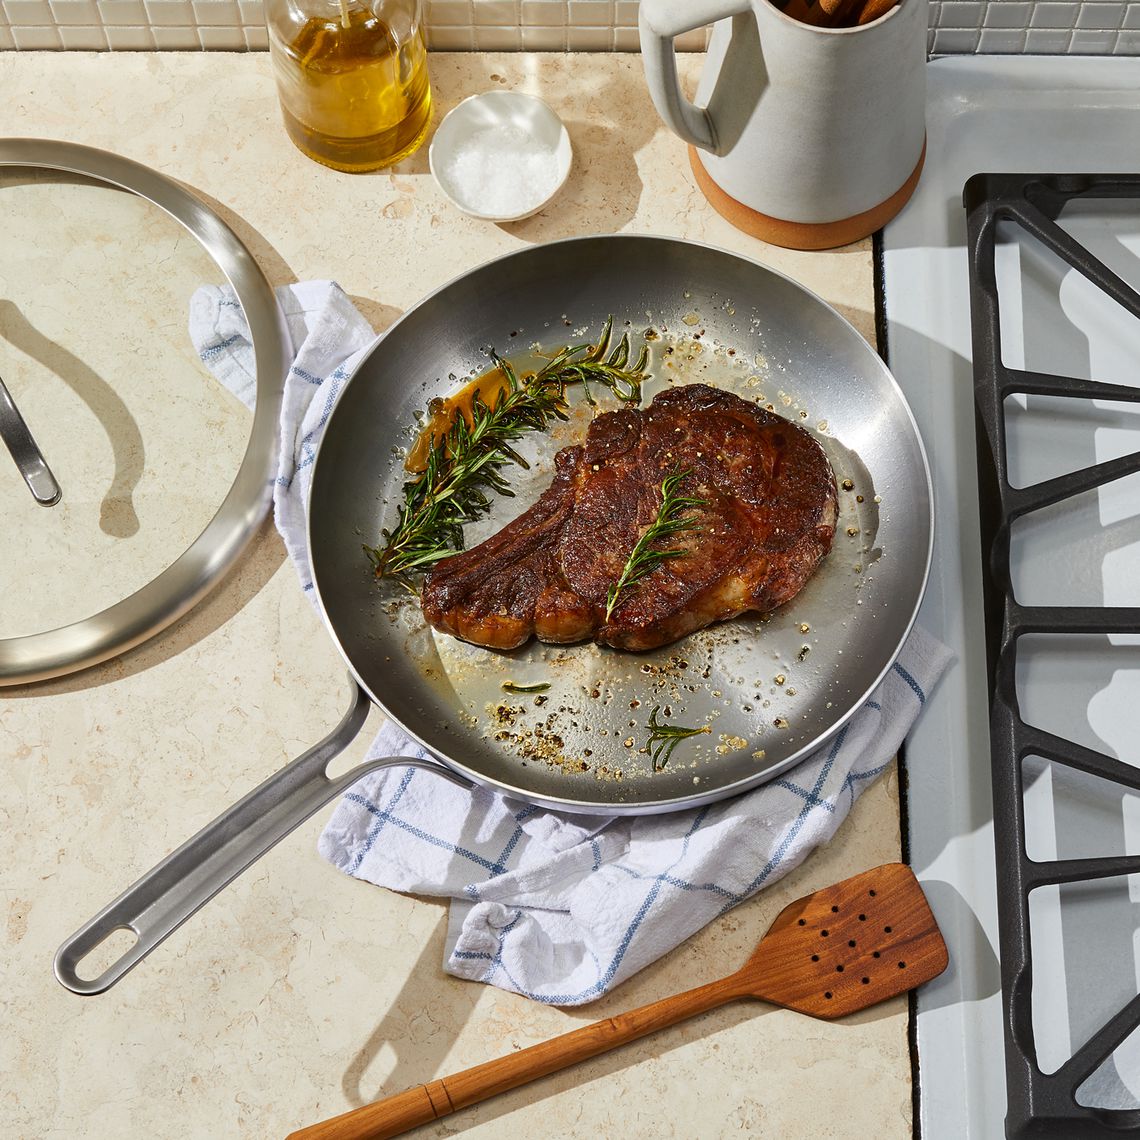 Five Two by Food52 Skillets, 2 Size Options, Tri-Ply Stainless Steel with  Pan Protectors, Nonstick on Food52